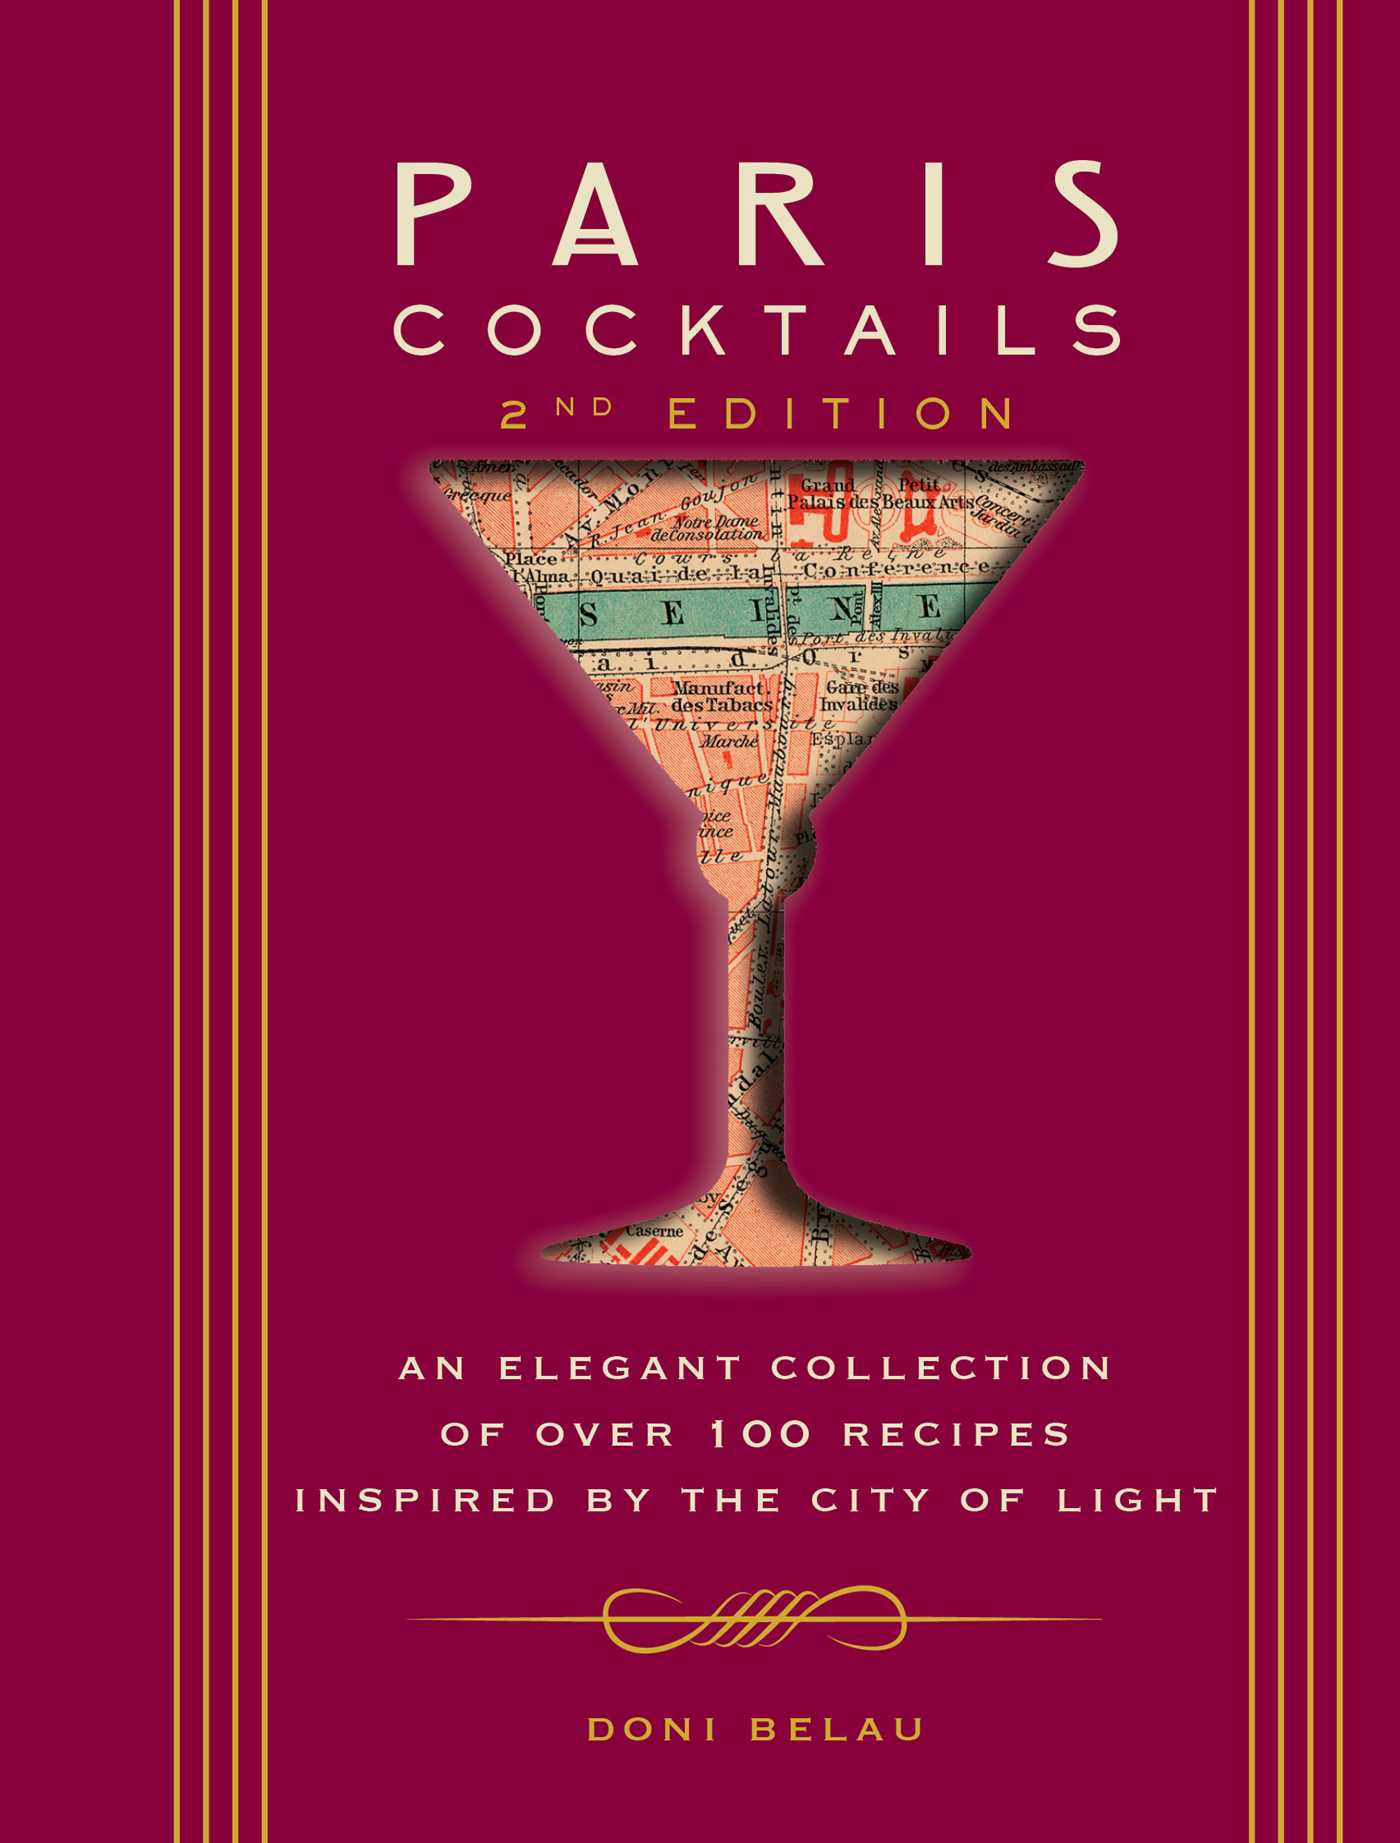 Paris Cocktails, Second Edition: An Elegant Collection of Over 100 Recipes Inspired by the City of Light